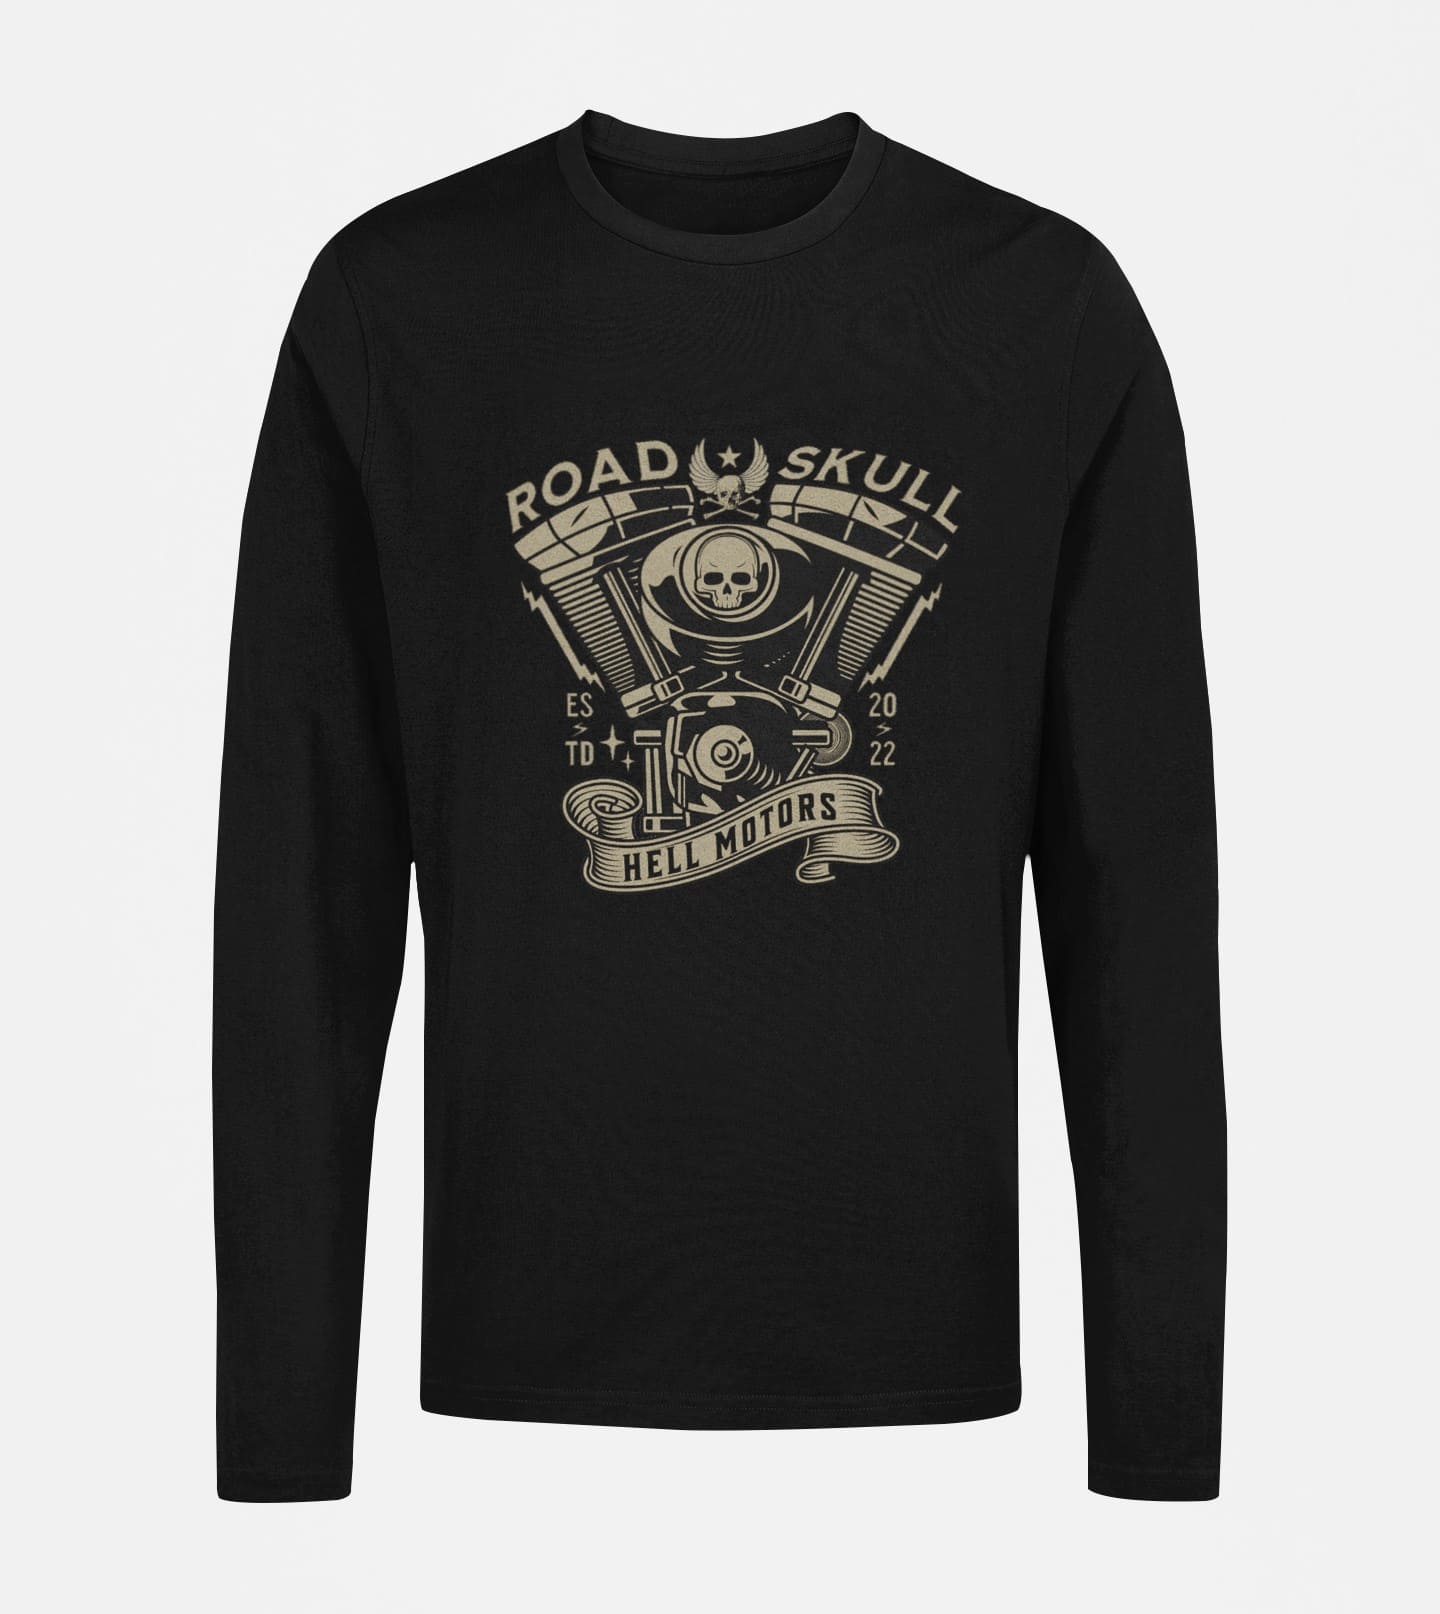 Biker-themed long sleeve tee in black with a captivating motorcycle illustration